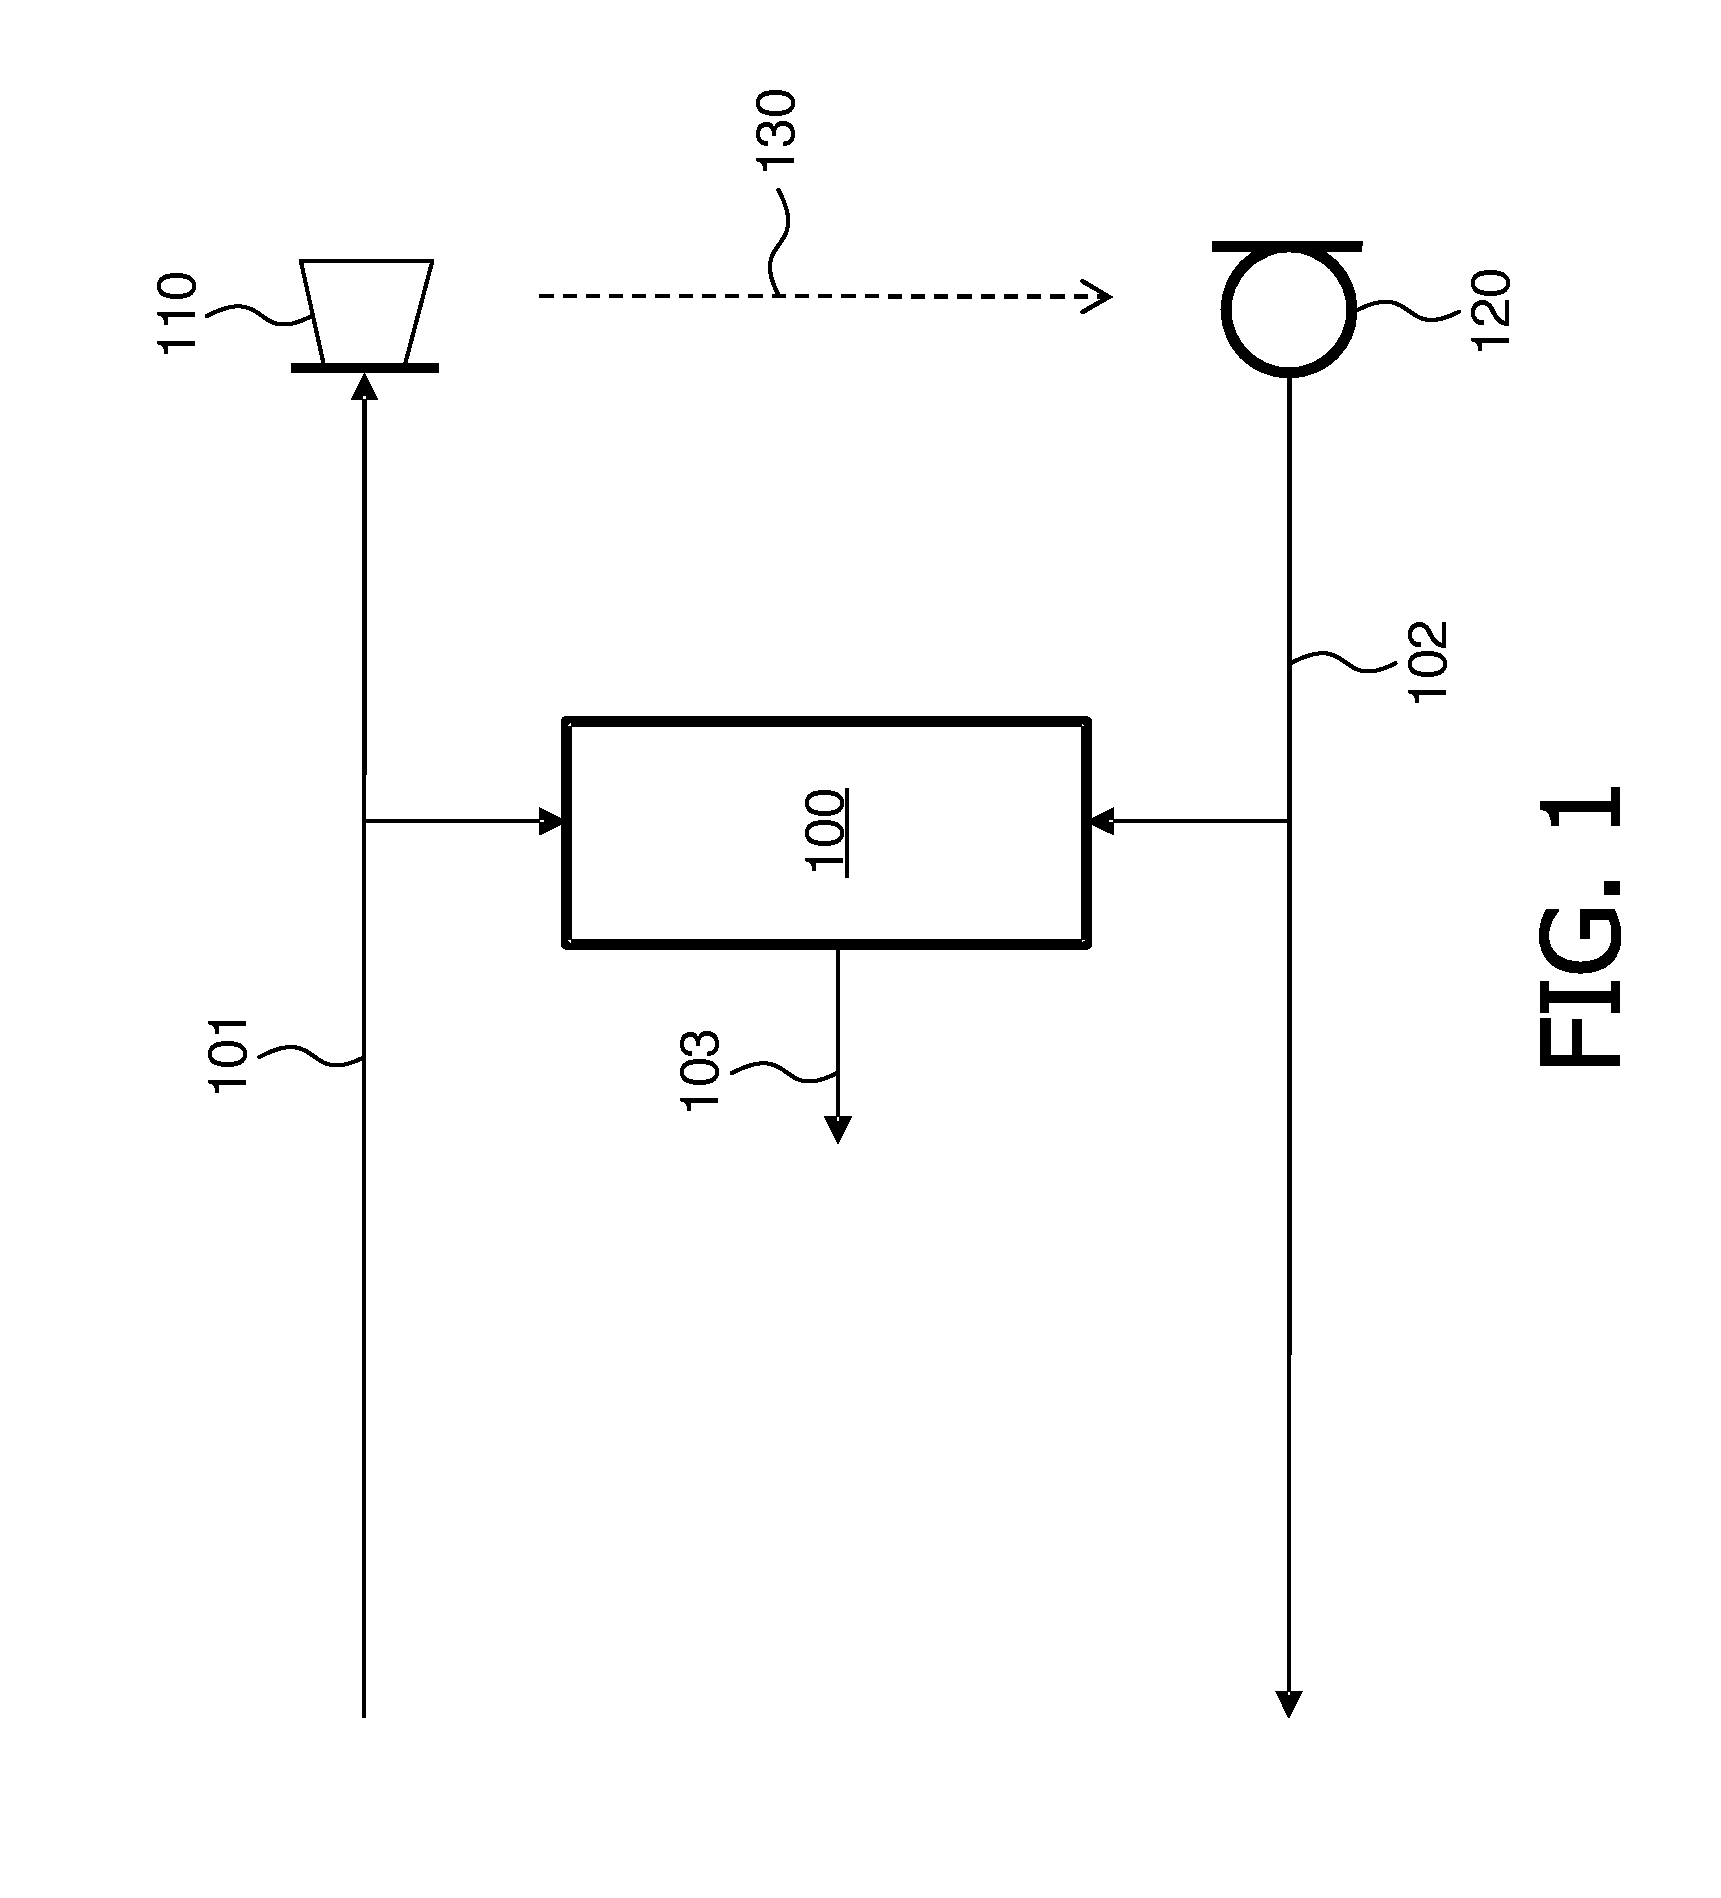 Determining an acoustic coupling between a far-end talker signal and a combined signal